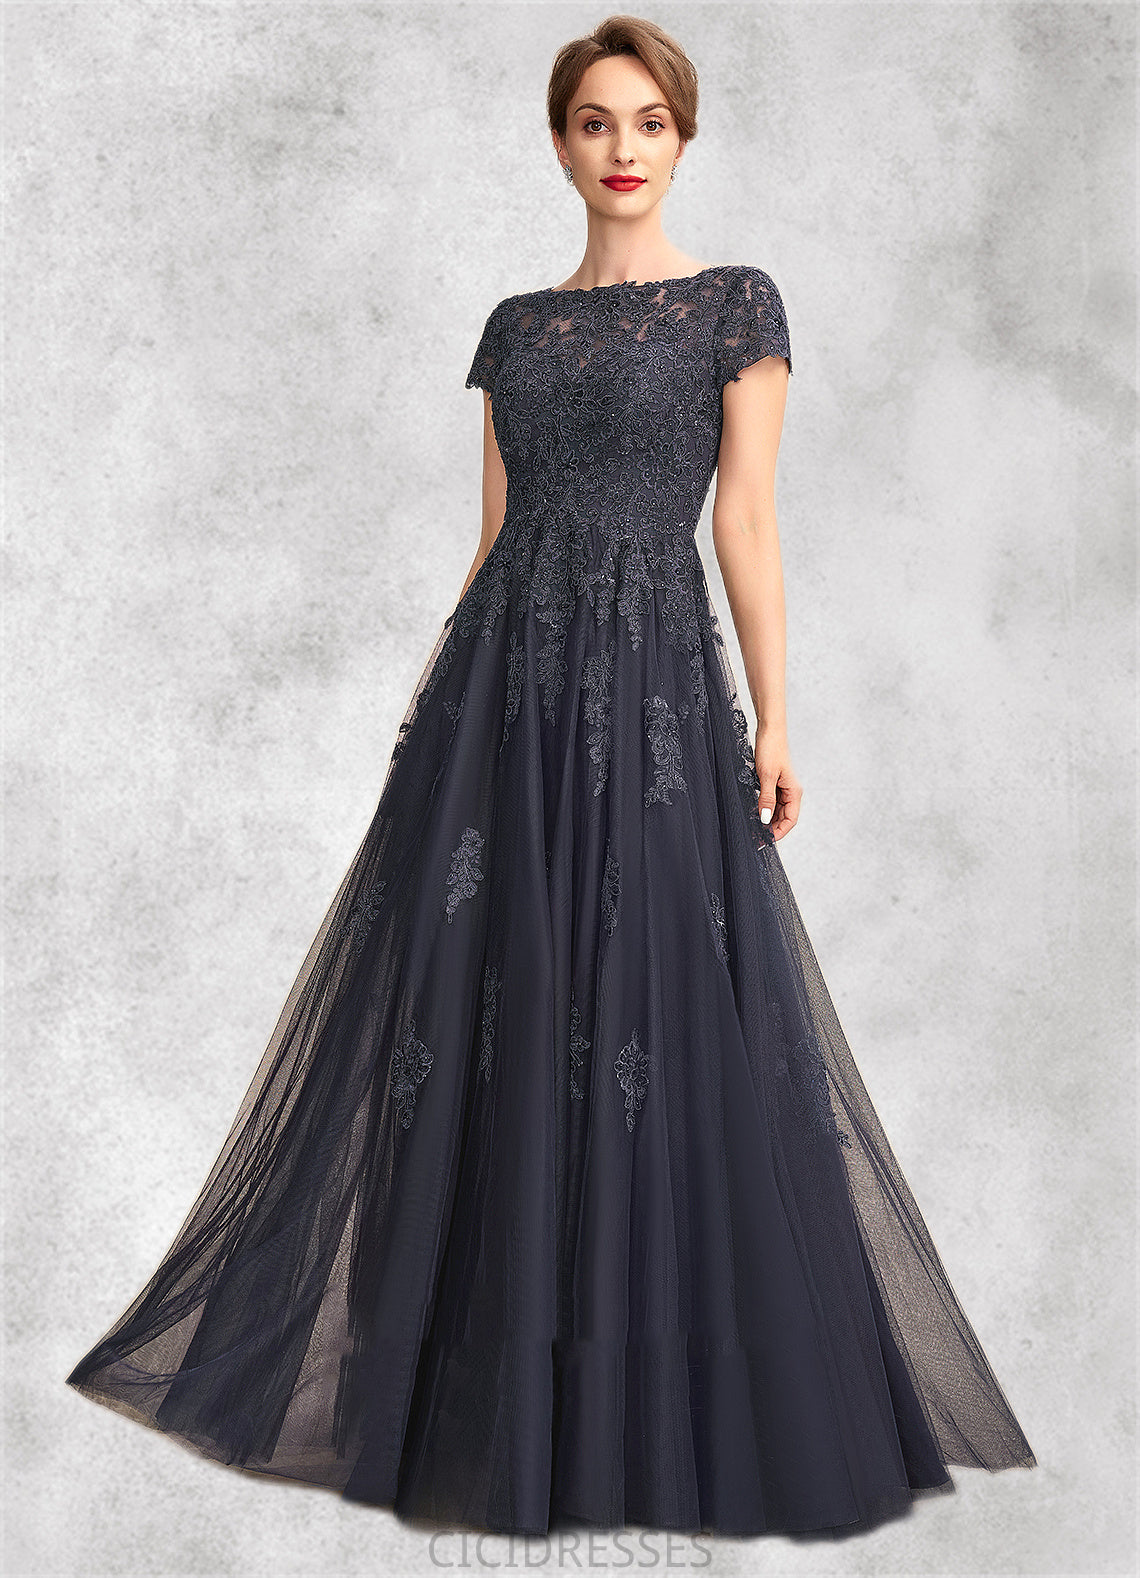 Kaitlyn A-Line Scoop Neck Floor-Length Tulle Lace Mother of the Bride Dress With Beading CIC8126P0015029